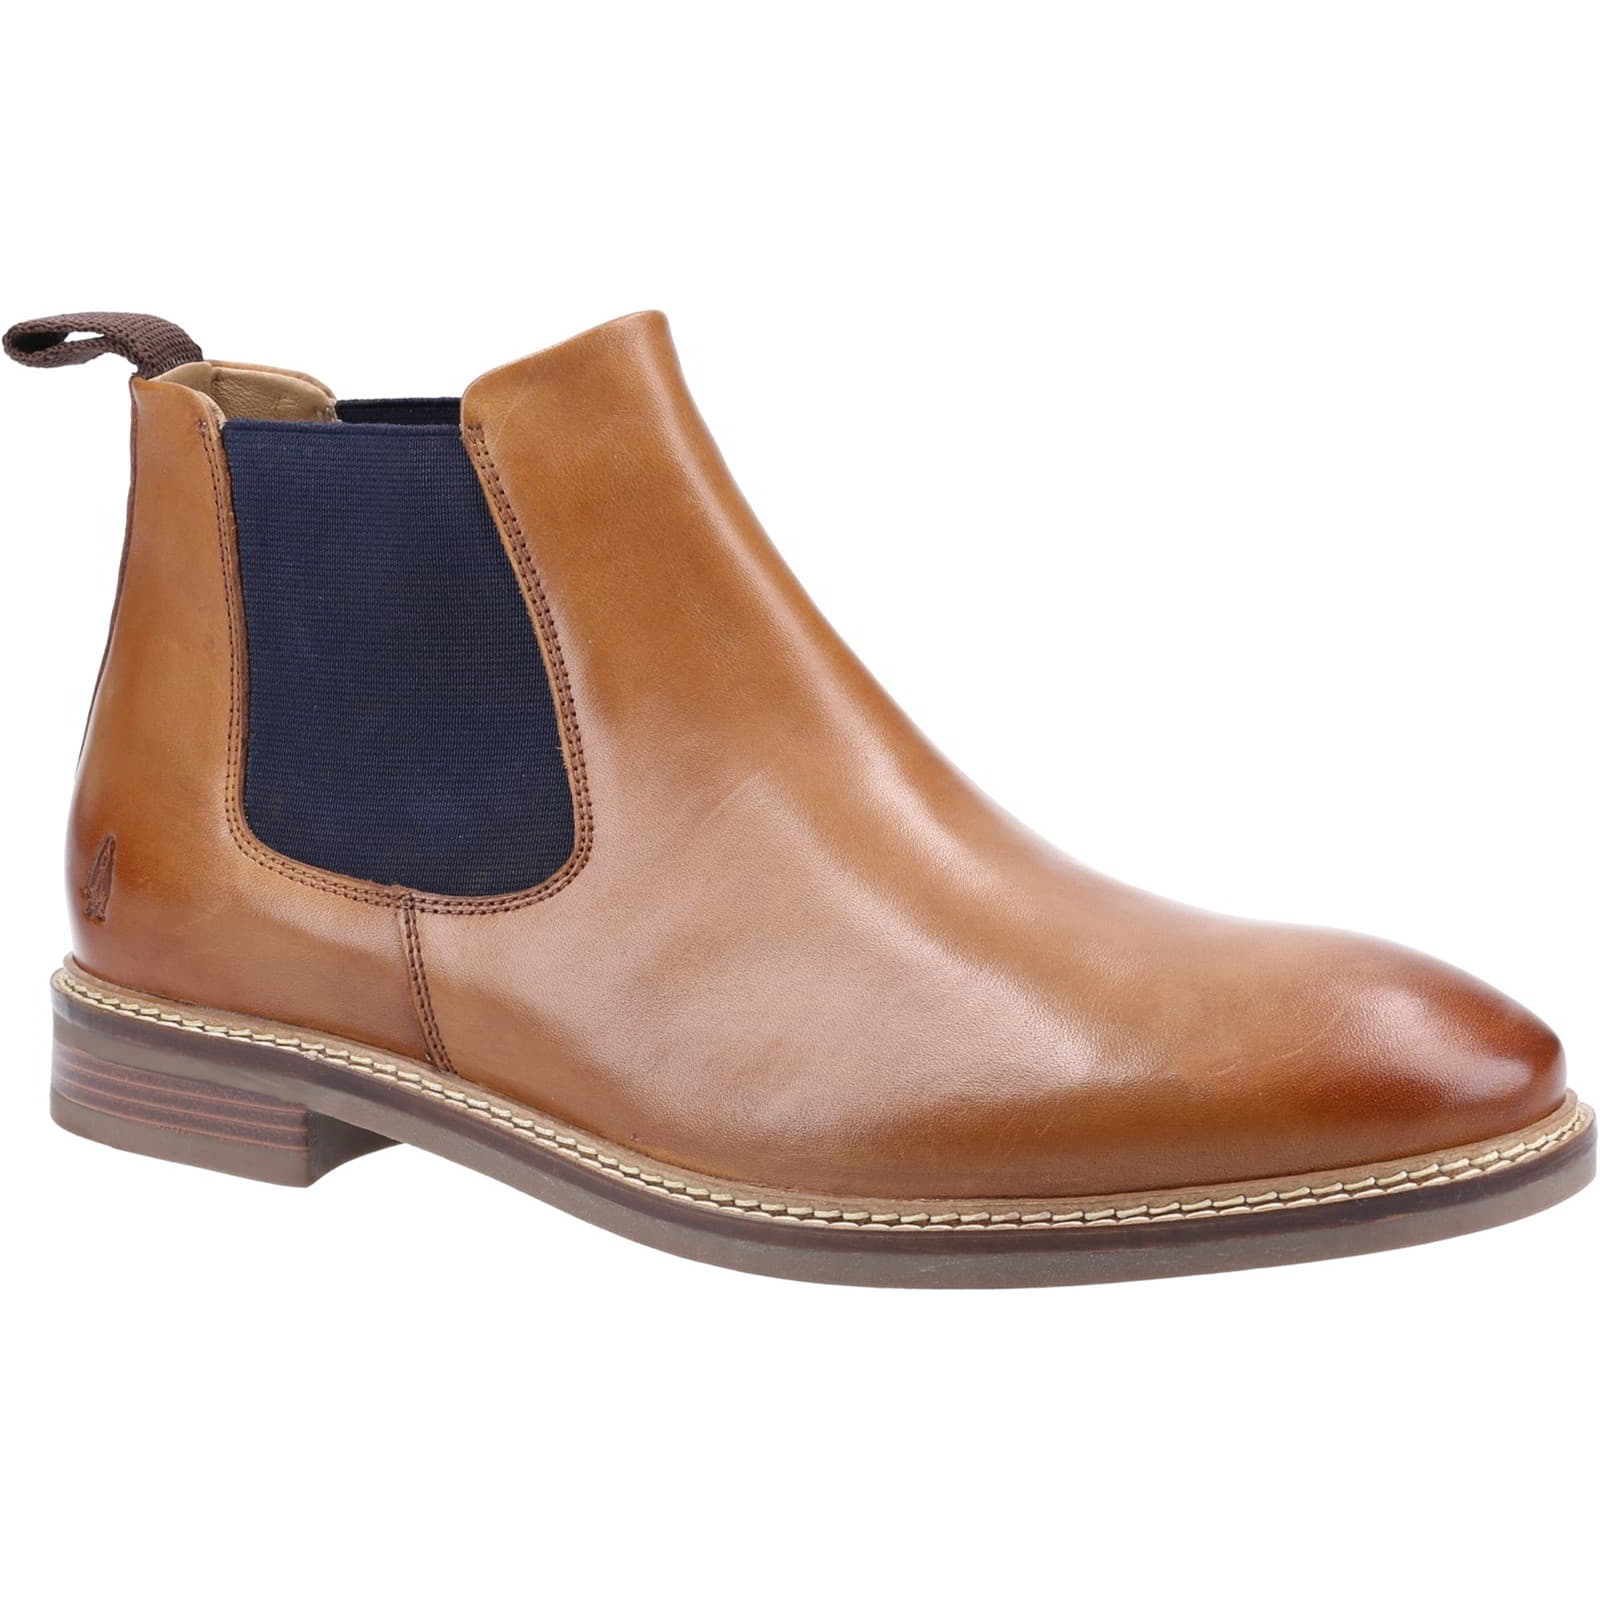 Hush Puppies Men's Blake Pull On Chelsea Ankle Boots - UK 9